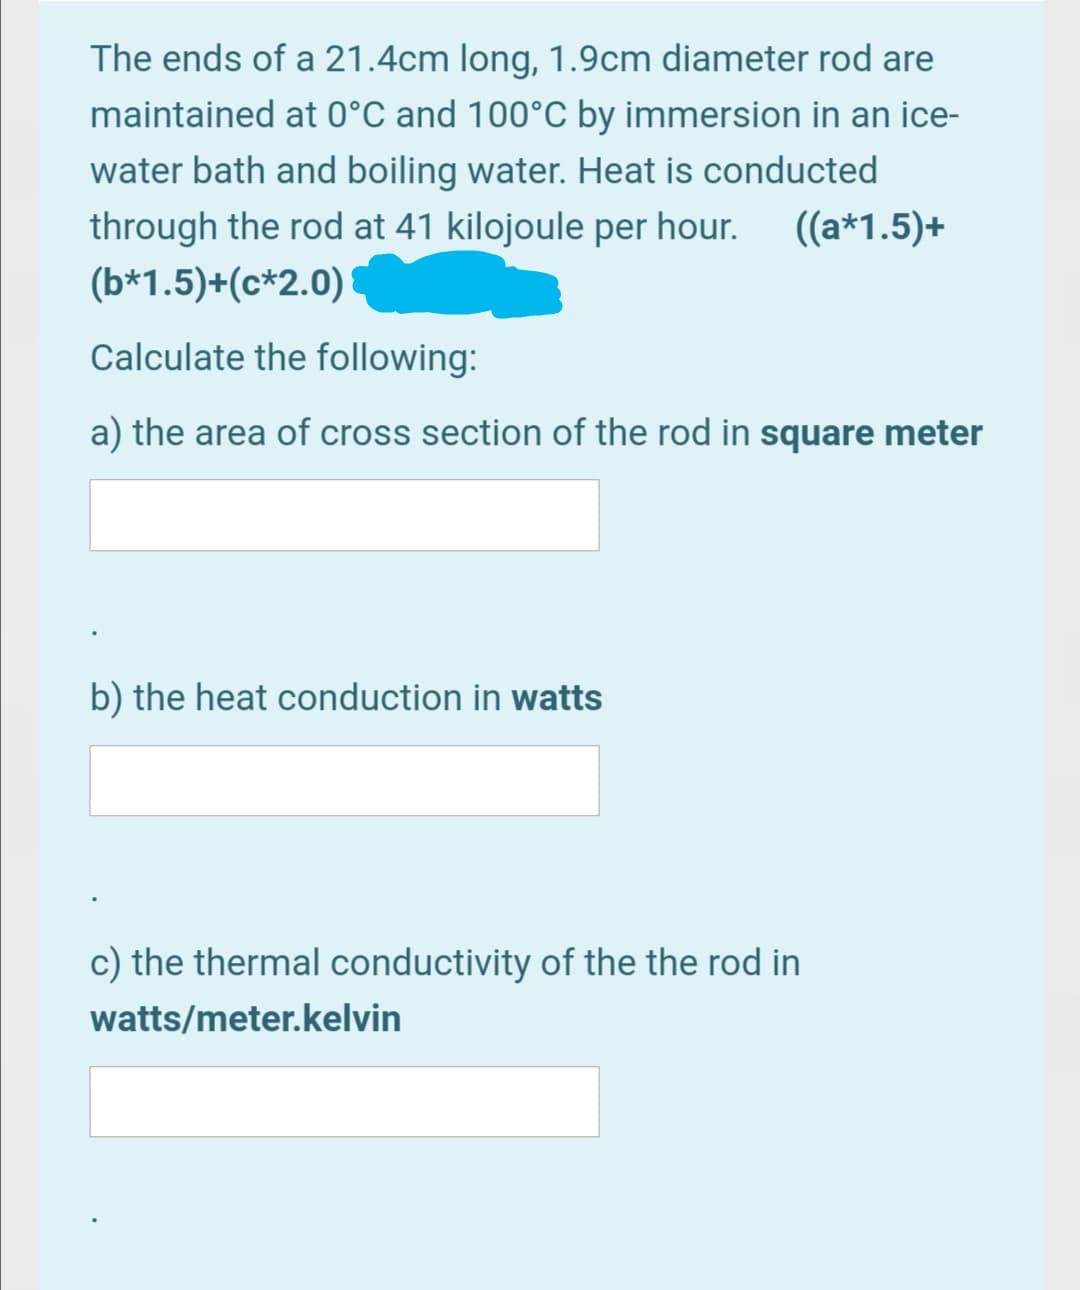 The ends of a 21.4cm long, 1.9cm diameter rod are
maintained at 0°C and 100°C by immersion in an ice-
water bath and boiling water. Heat is conducted
through the rod at 41 kilojoule per hour.
((a*1.5)+
(b*1.5)+(c*2.0)
Calculate the following:
a) the area of cross section of the rod in square meter
b) the heat conduction in watts
c) the thermal conductivity of the the rod in
watts/meter.kelvin
